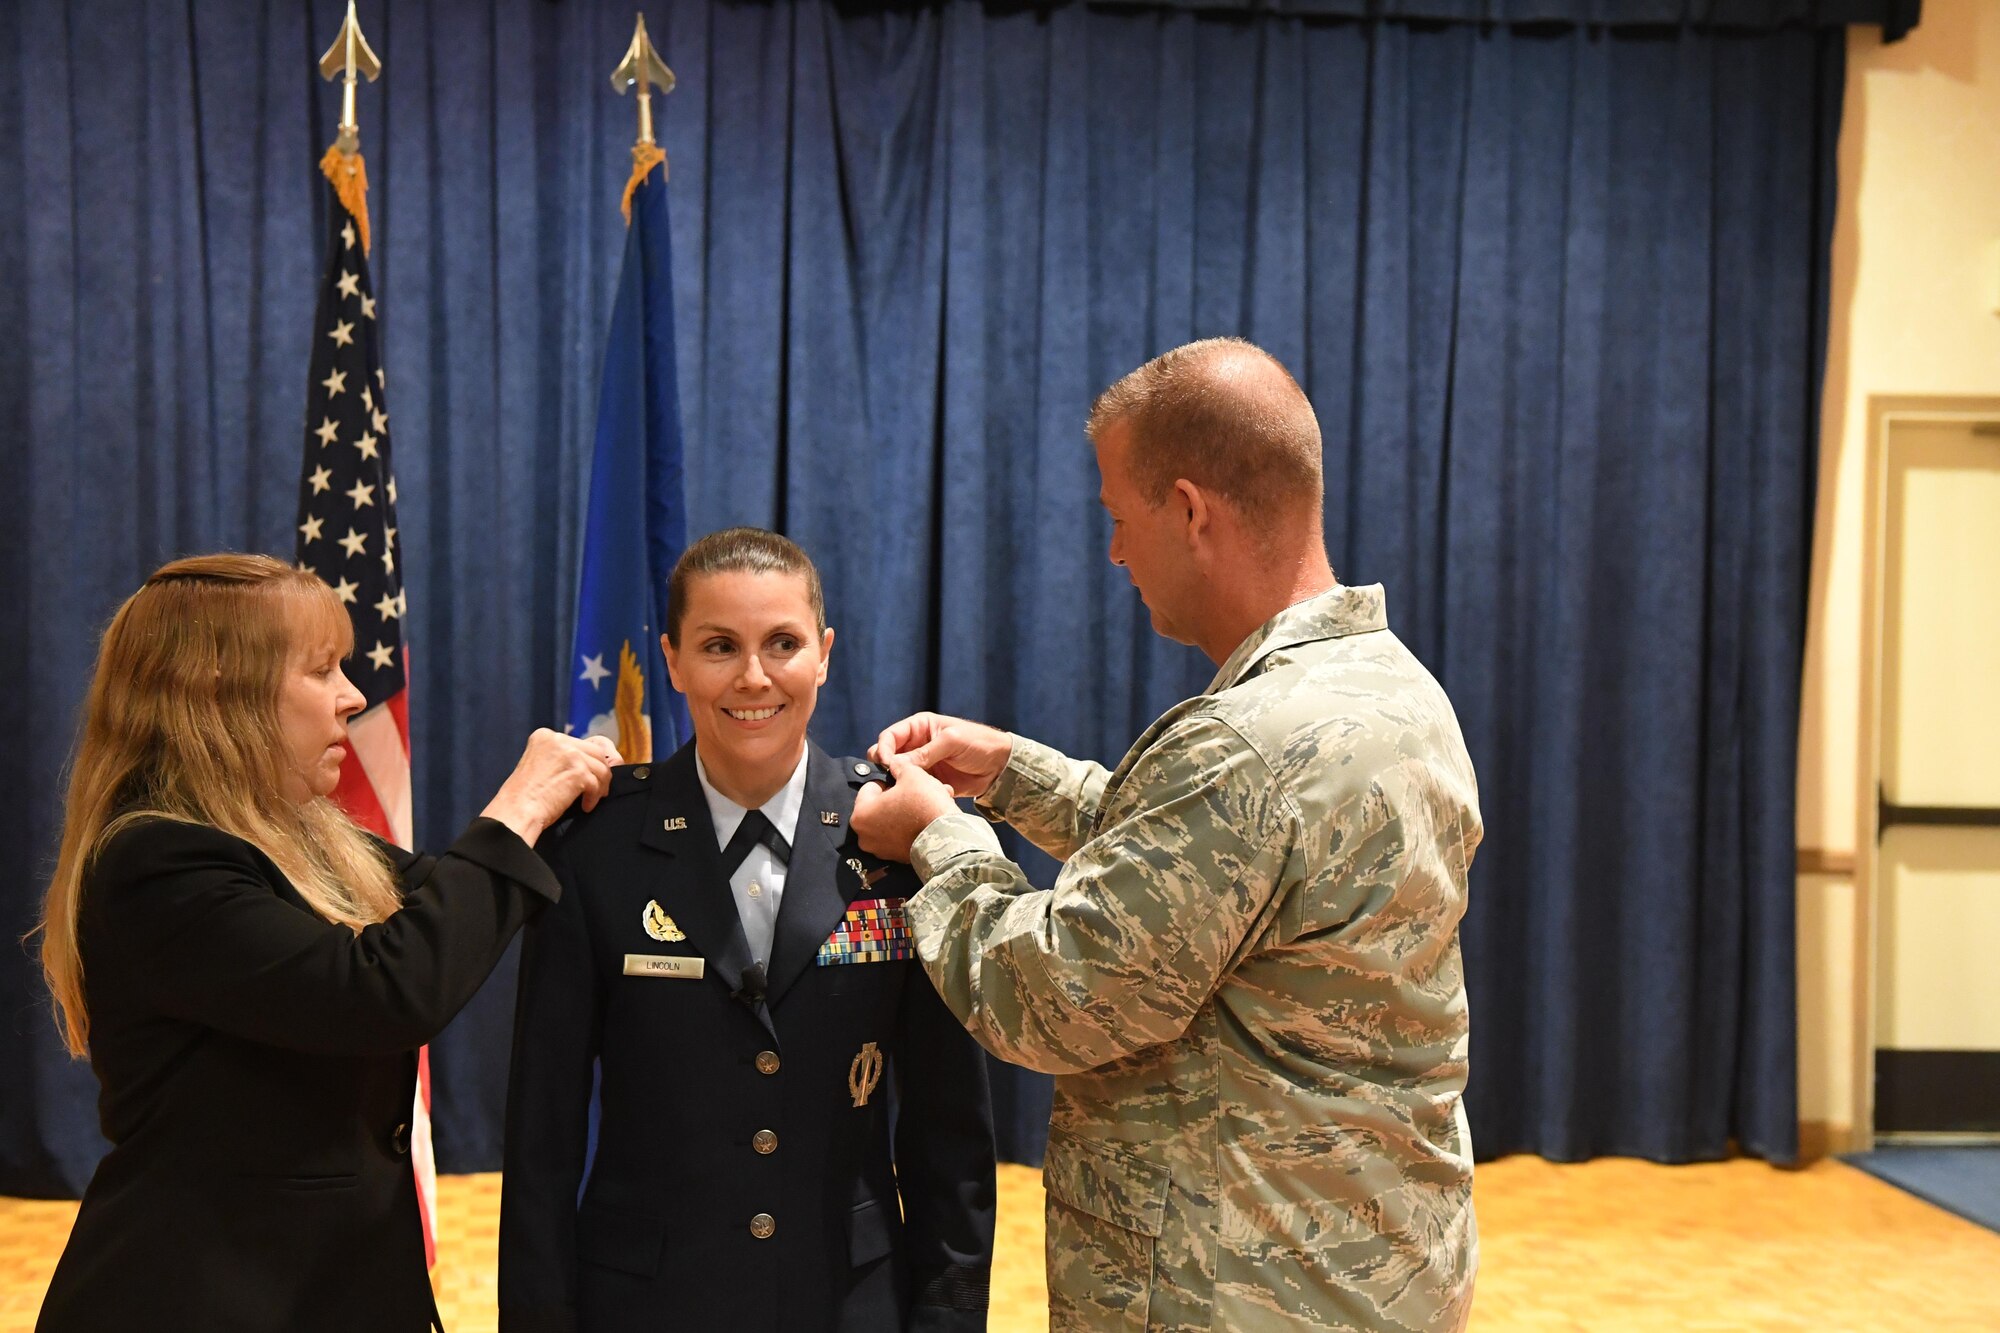 Brig. Gen. Pamela J. Lincoln, Mobilization Assistant to the Commander, 14th Air Force (Air Forces Strategic) and Joint Functional Component Command for Space, was promoted to major general during a ceremony July 10, 2017 at Vandenberg Air Force Base, California. (U.S. Air Force photo by Capt. Nicholas Mercurio/Released)